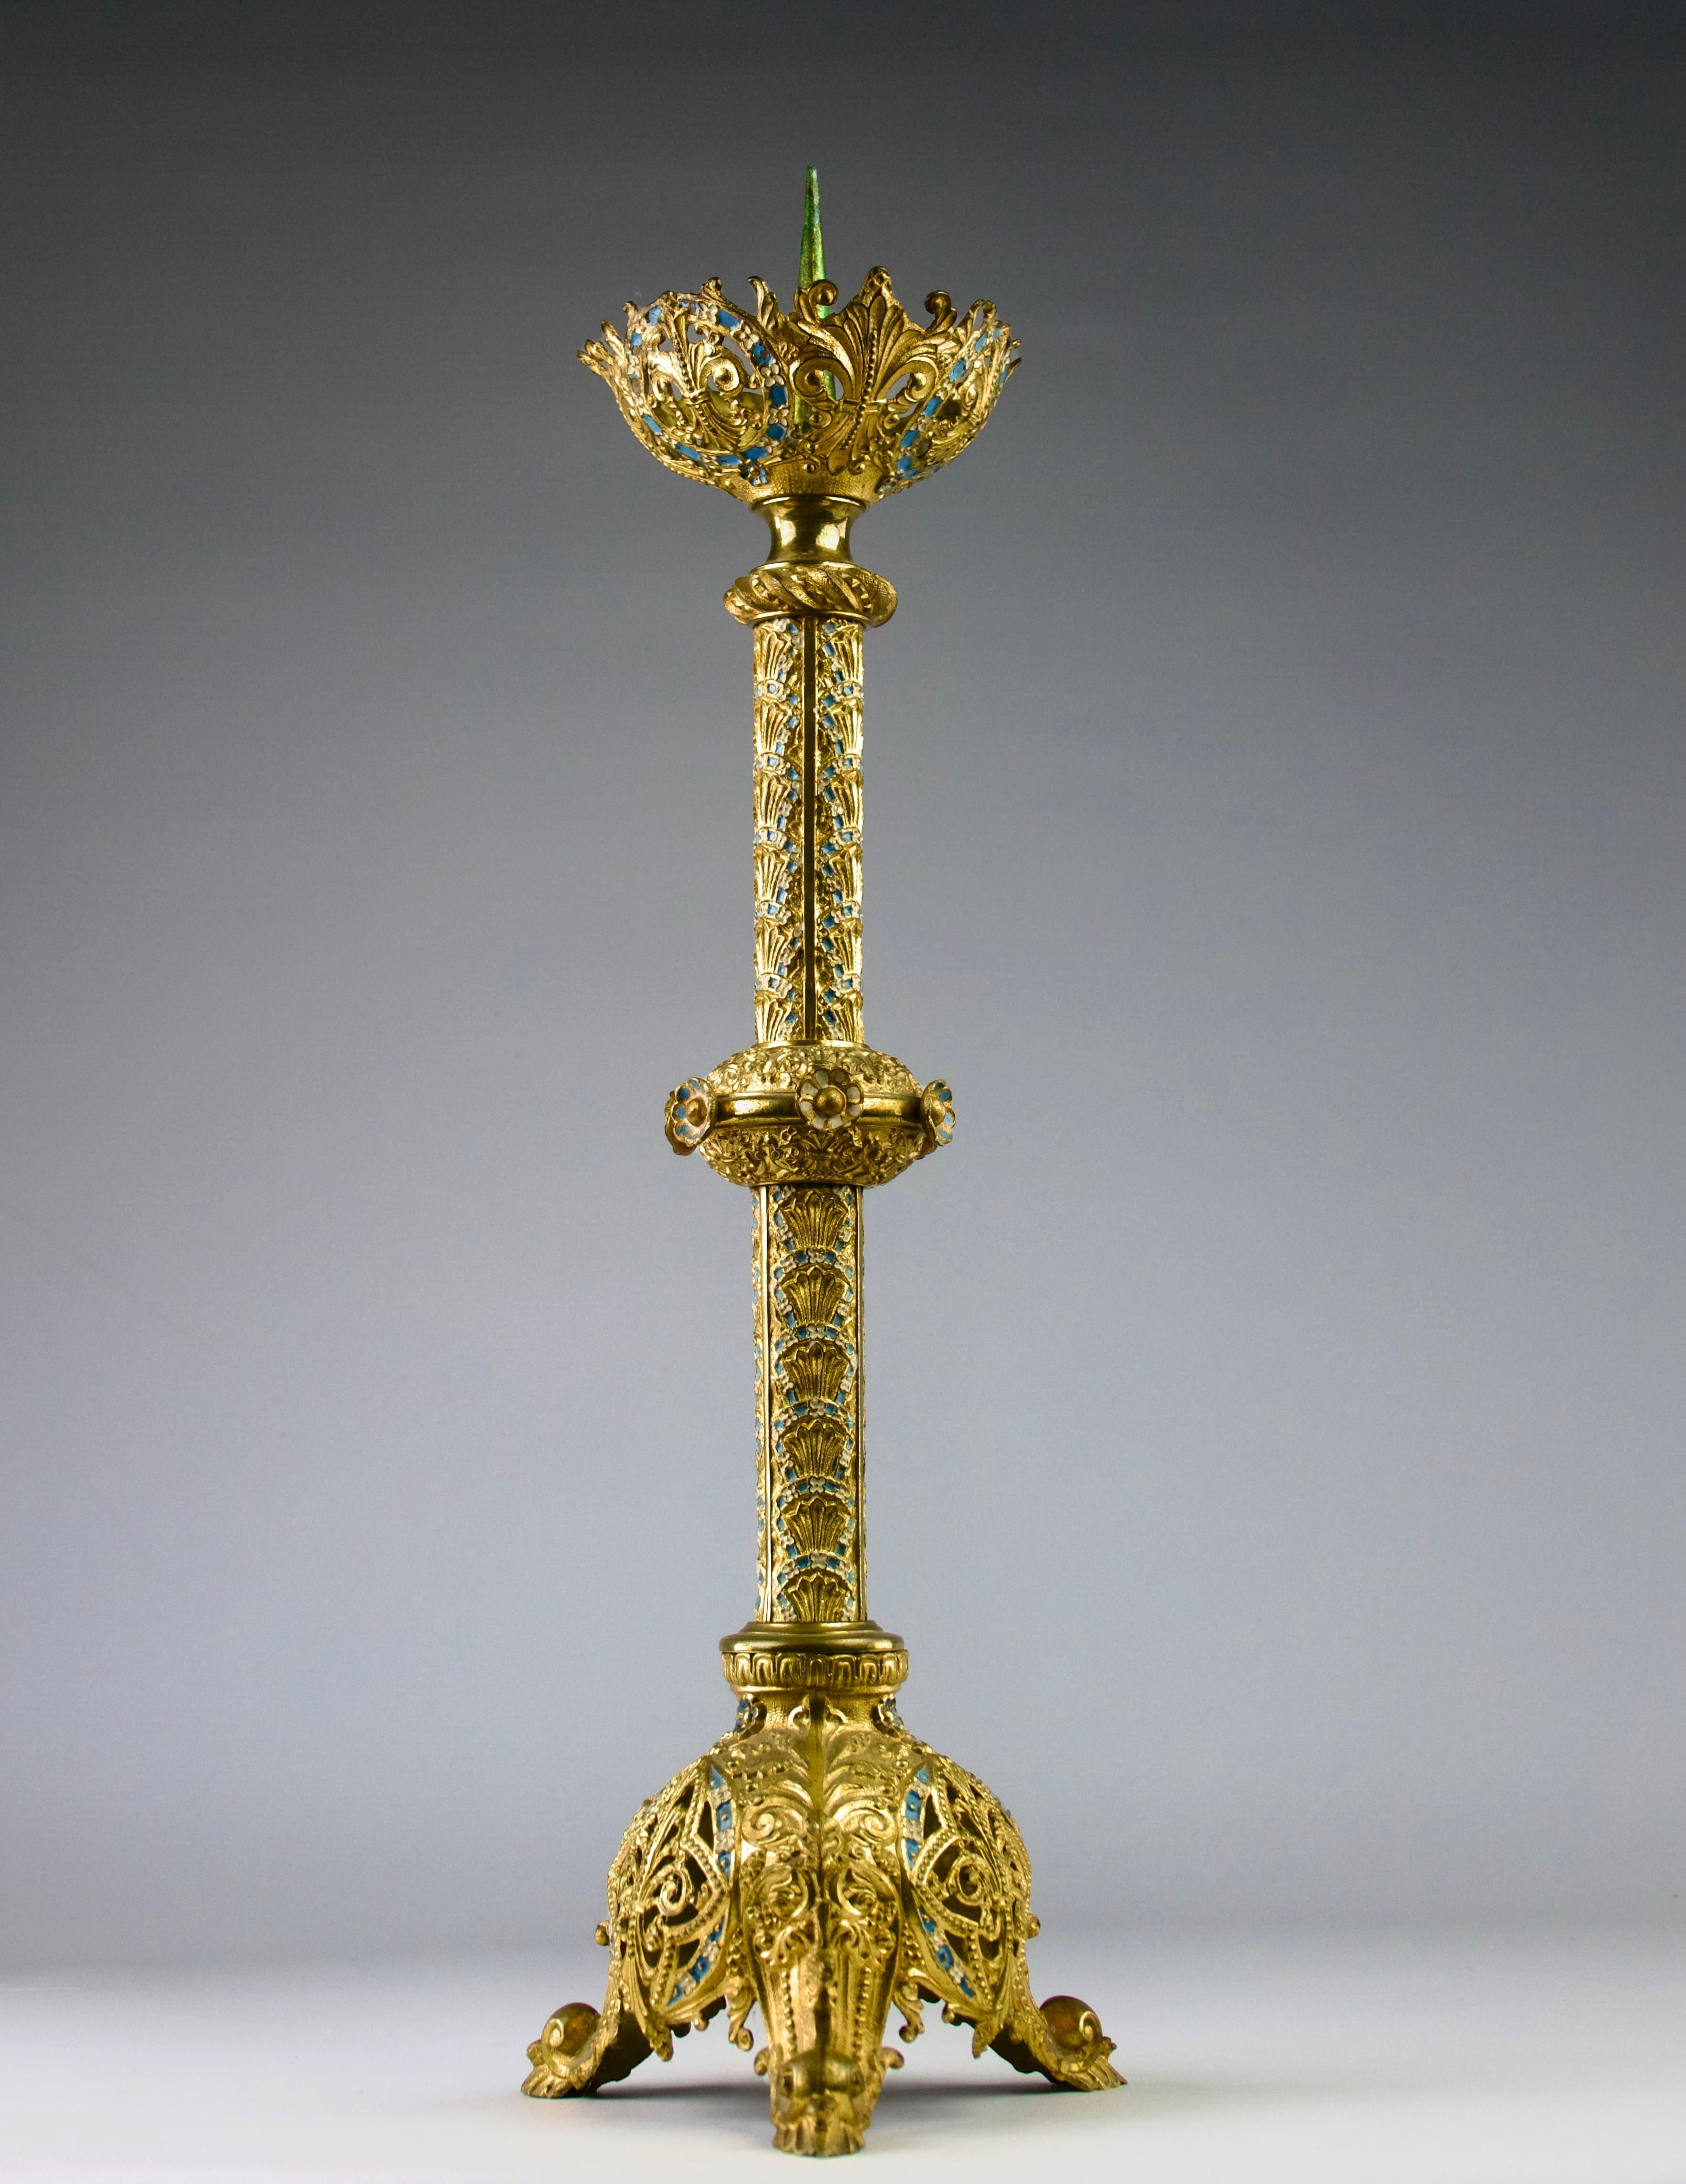 Superb church altar candlestick of the Romantic period. Decorations in gold leaf and blue and white enamel of flowers, fleur-de-lys (symbol of the French royal house) and rams at the feet, France 19th century.

In good condition.

Dimensions in